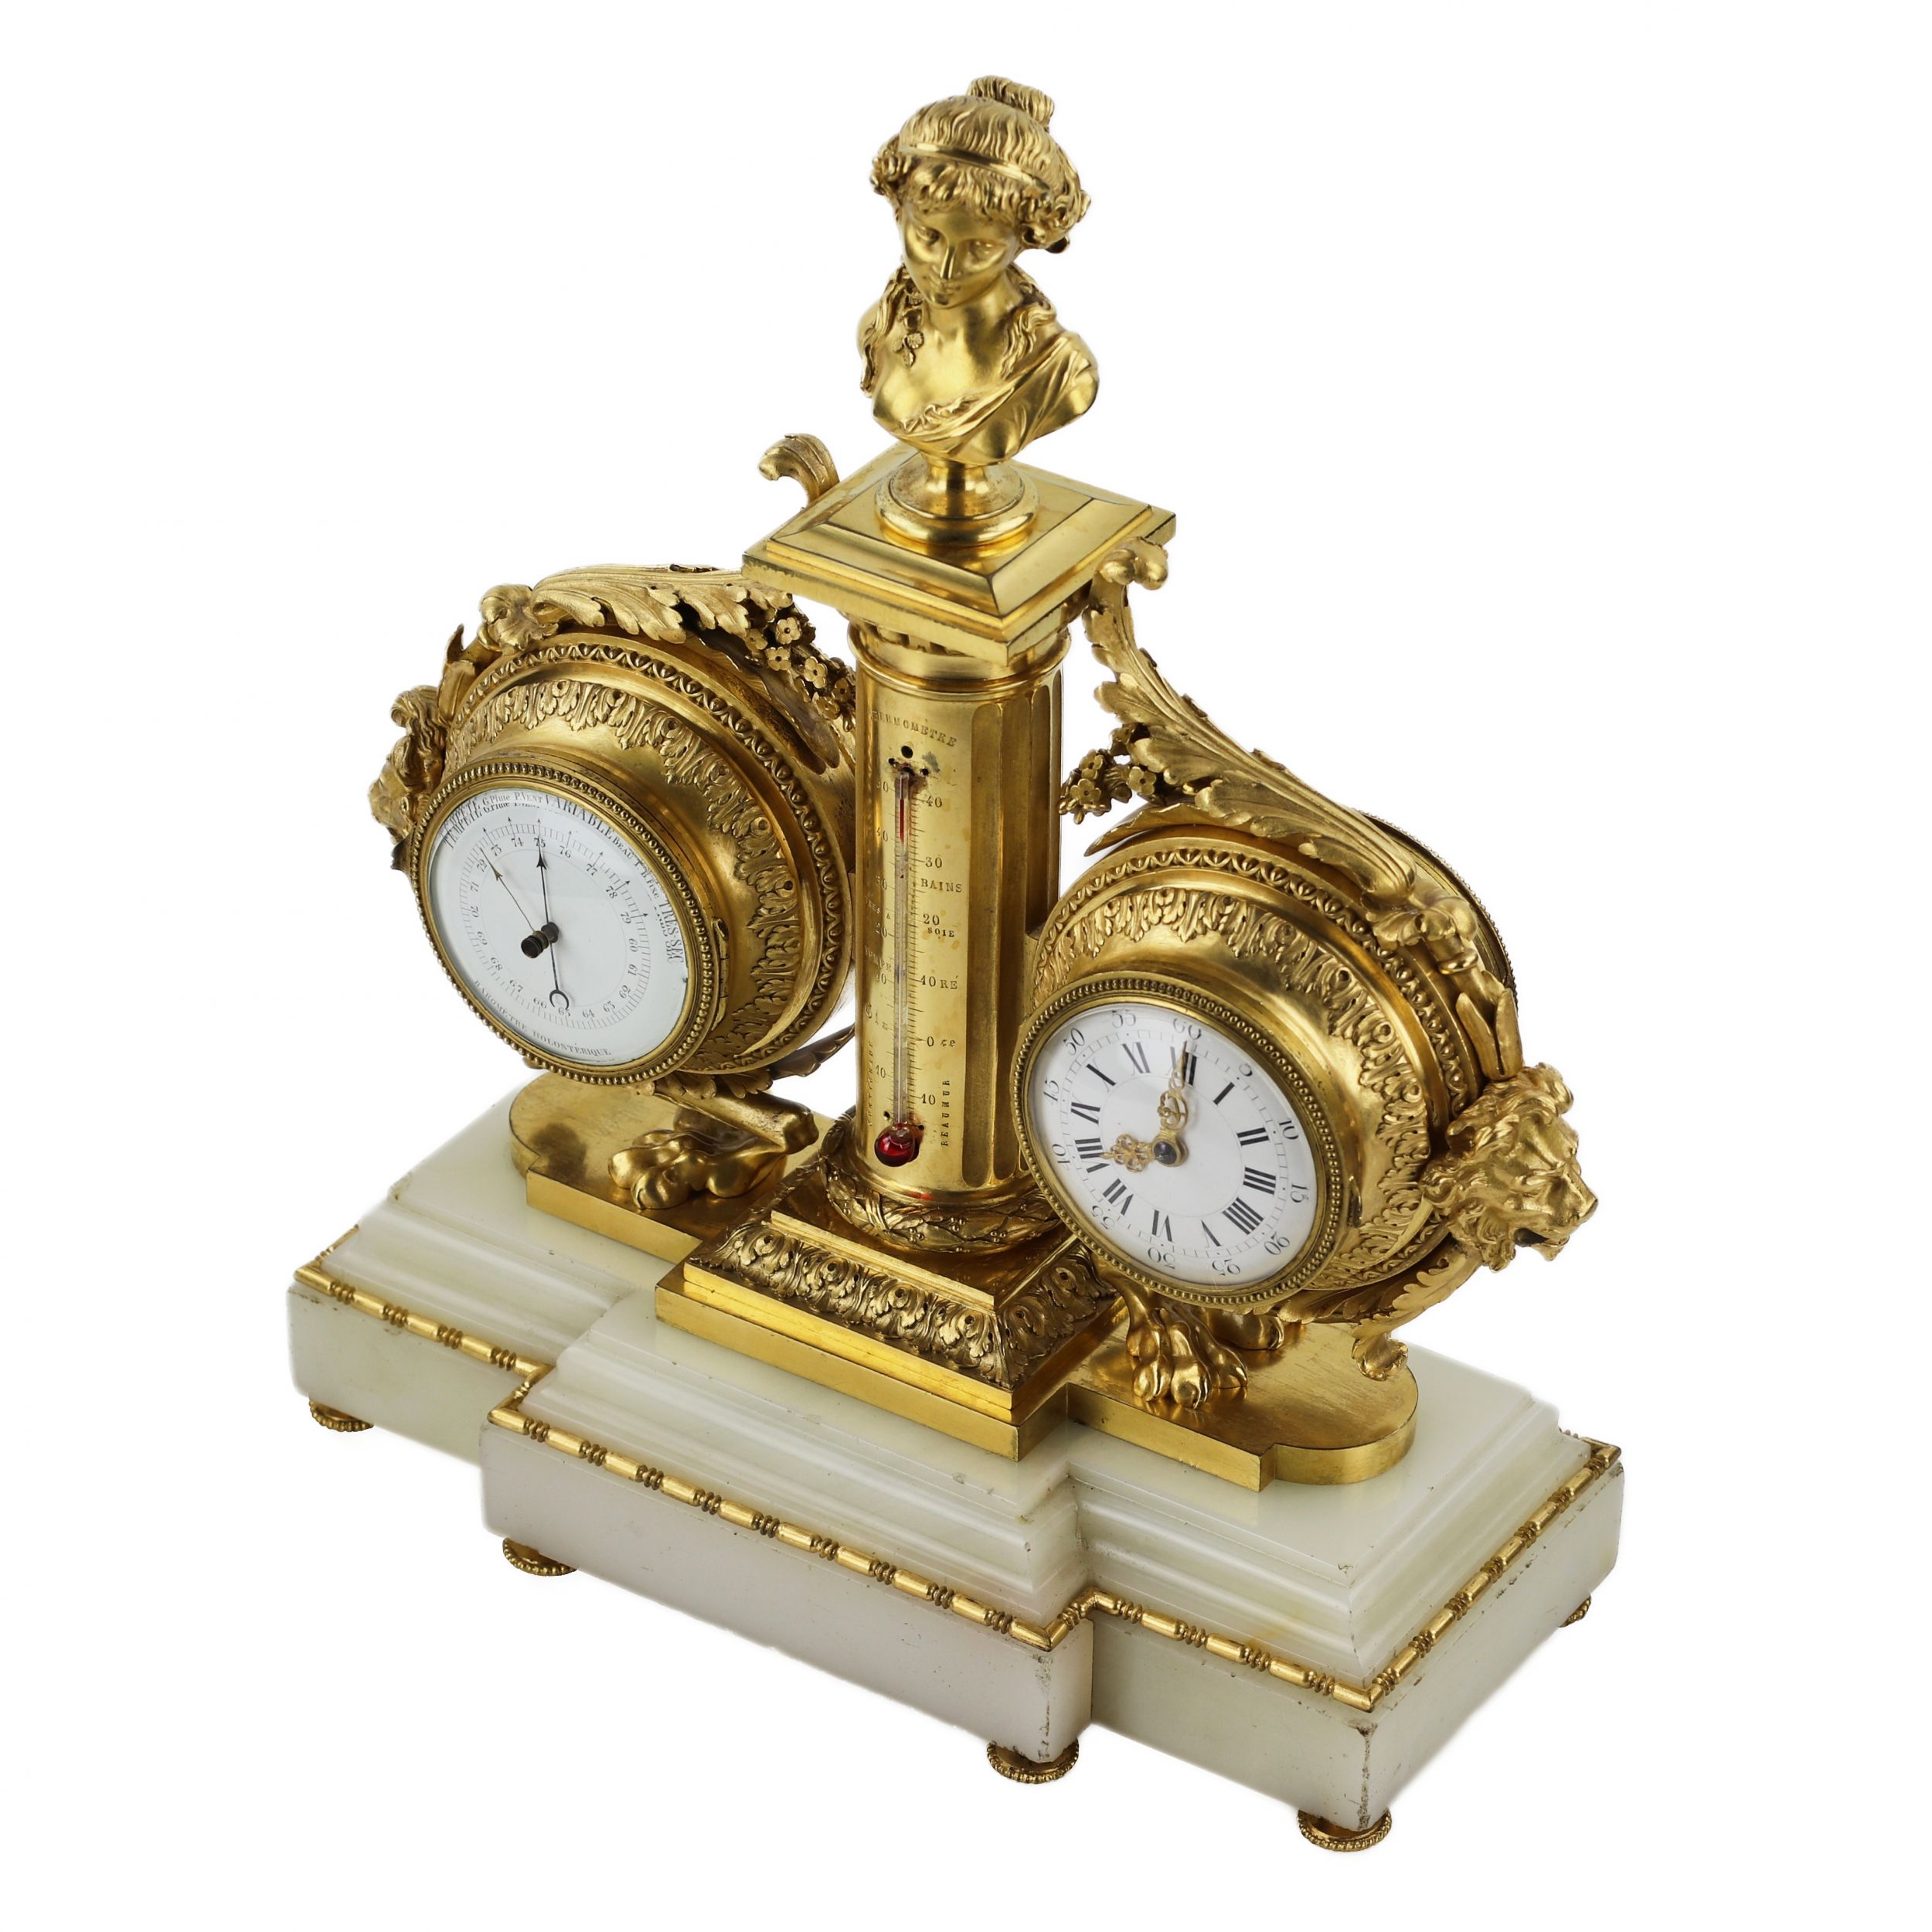 Tabletop instrument in white marble, gilded bronze: with clock, thermometer and barometer. 19th cent - Image 7 of 7